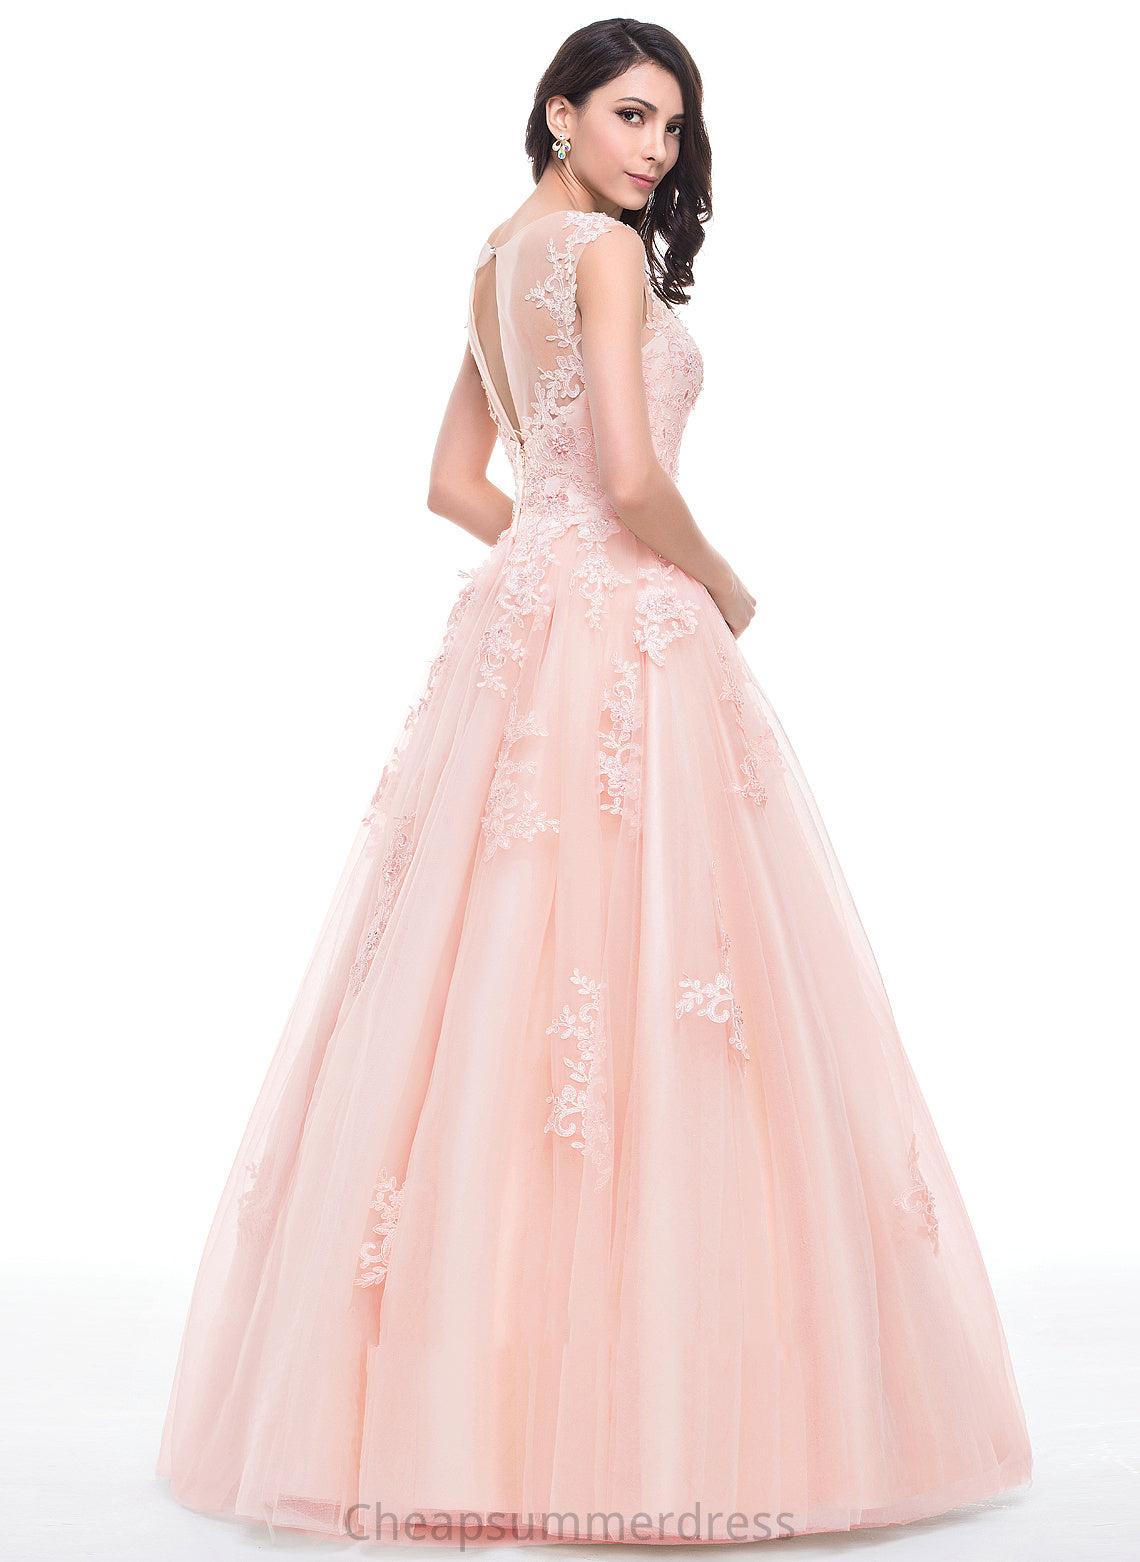 Lace Appliques Prom Dresses Floor-Length With Tulle Ball-Gown/Princess Scoop Beading Sequins Carleigh Neck